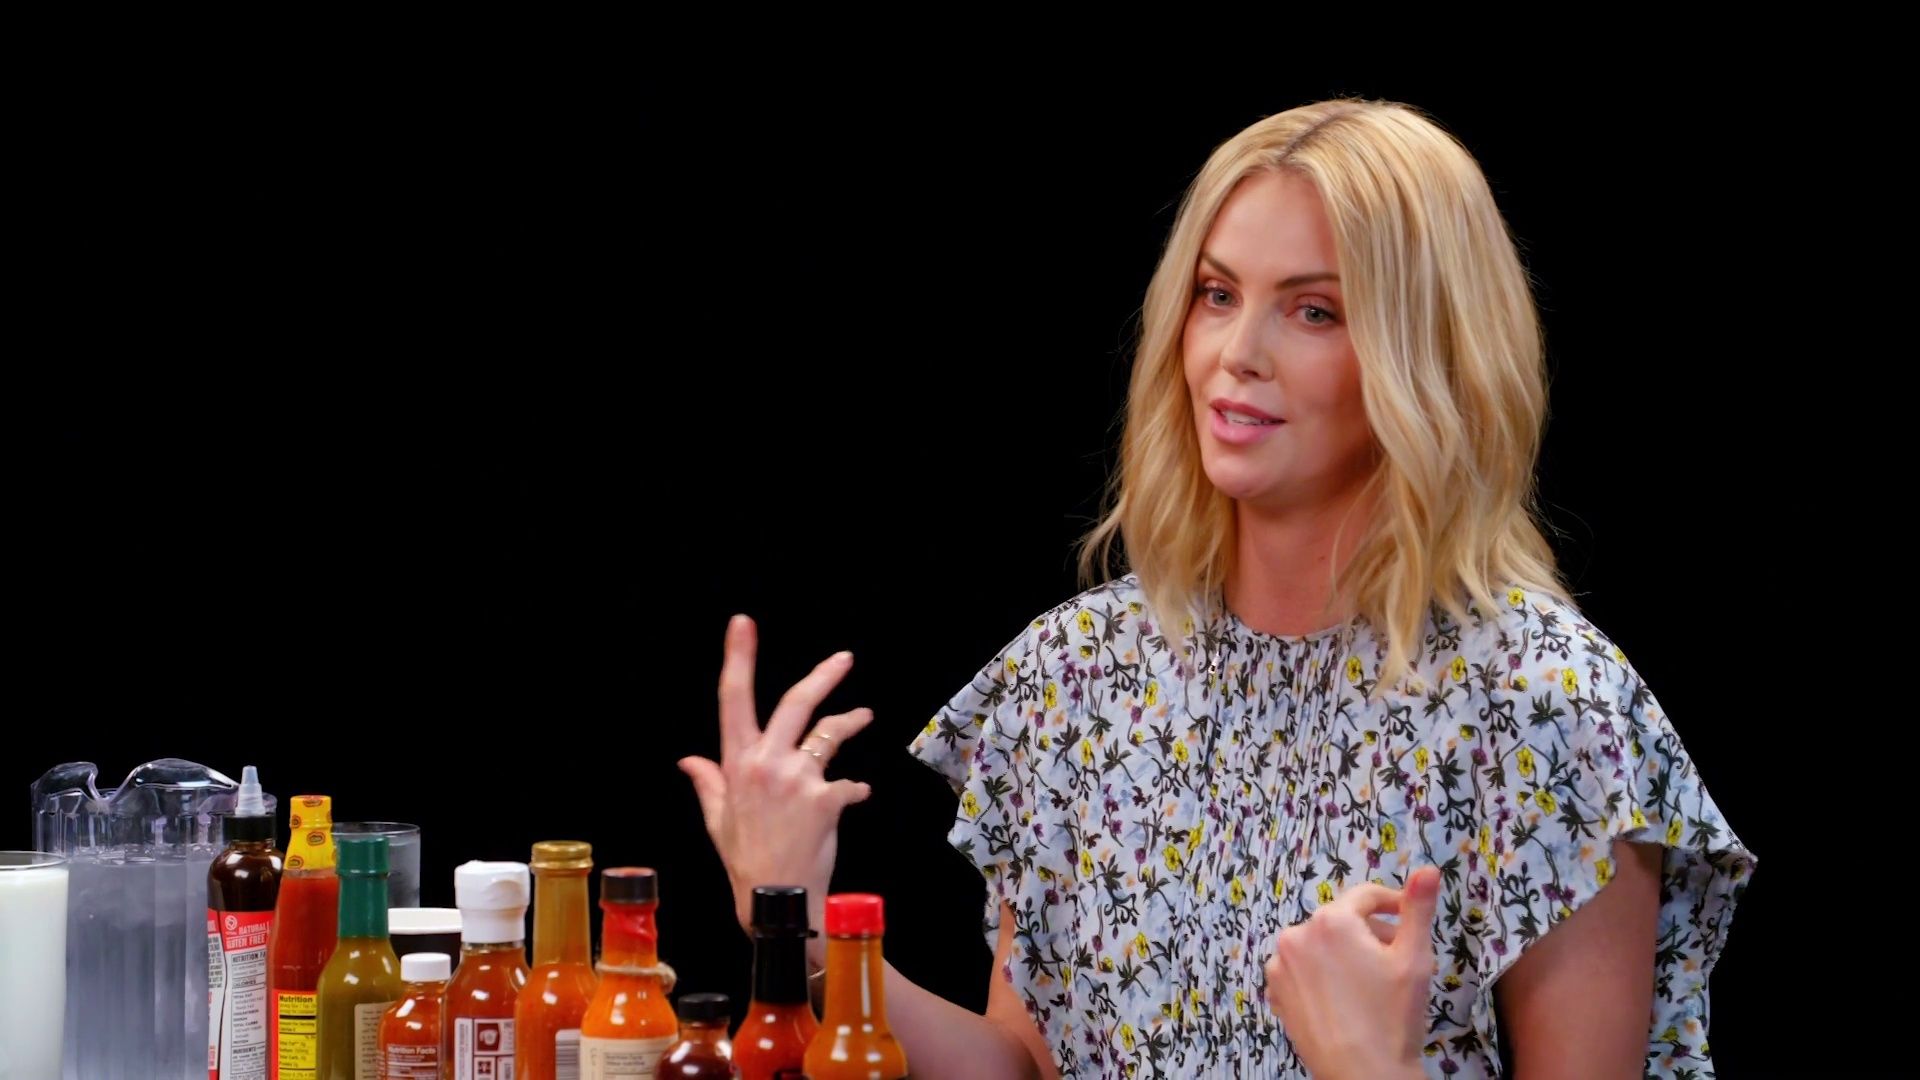 Charlize Theron Takes a Rorschach Test While Eating Spicy Wings